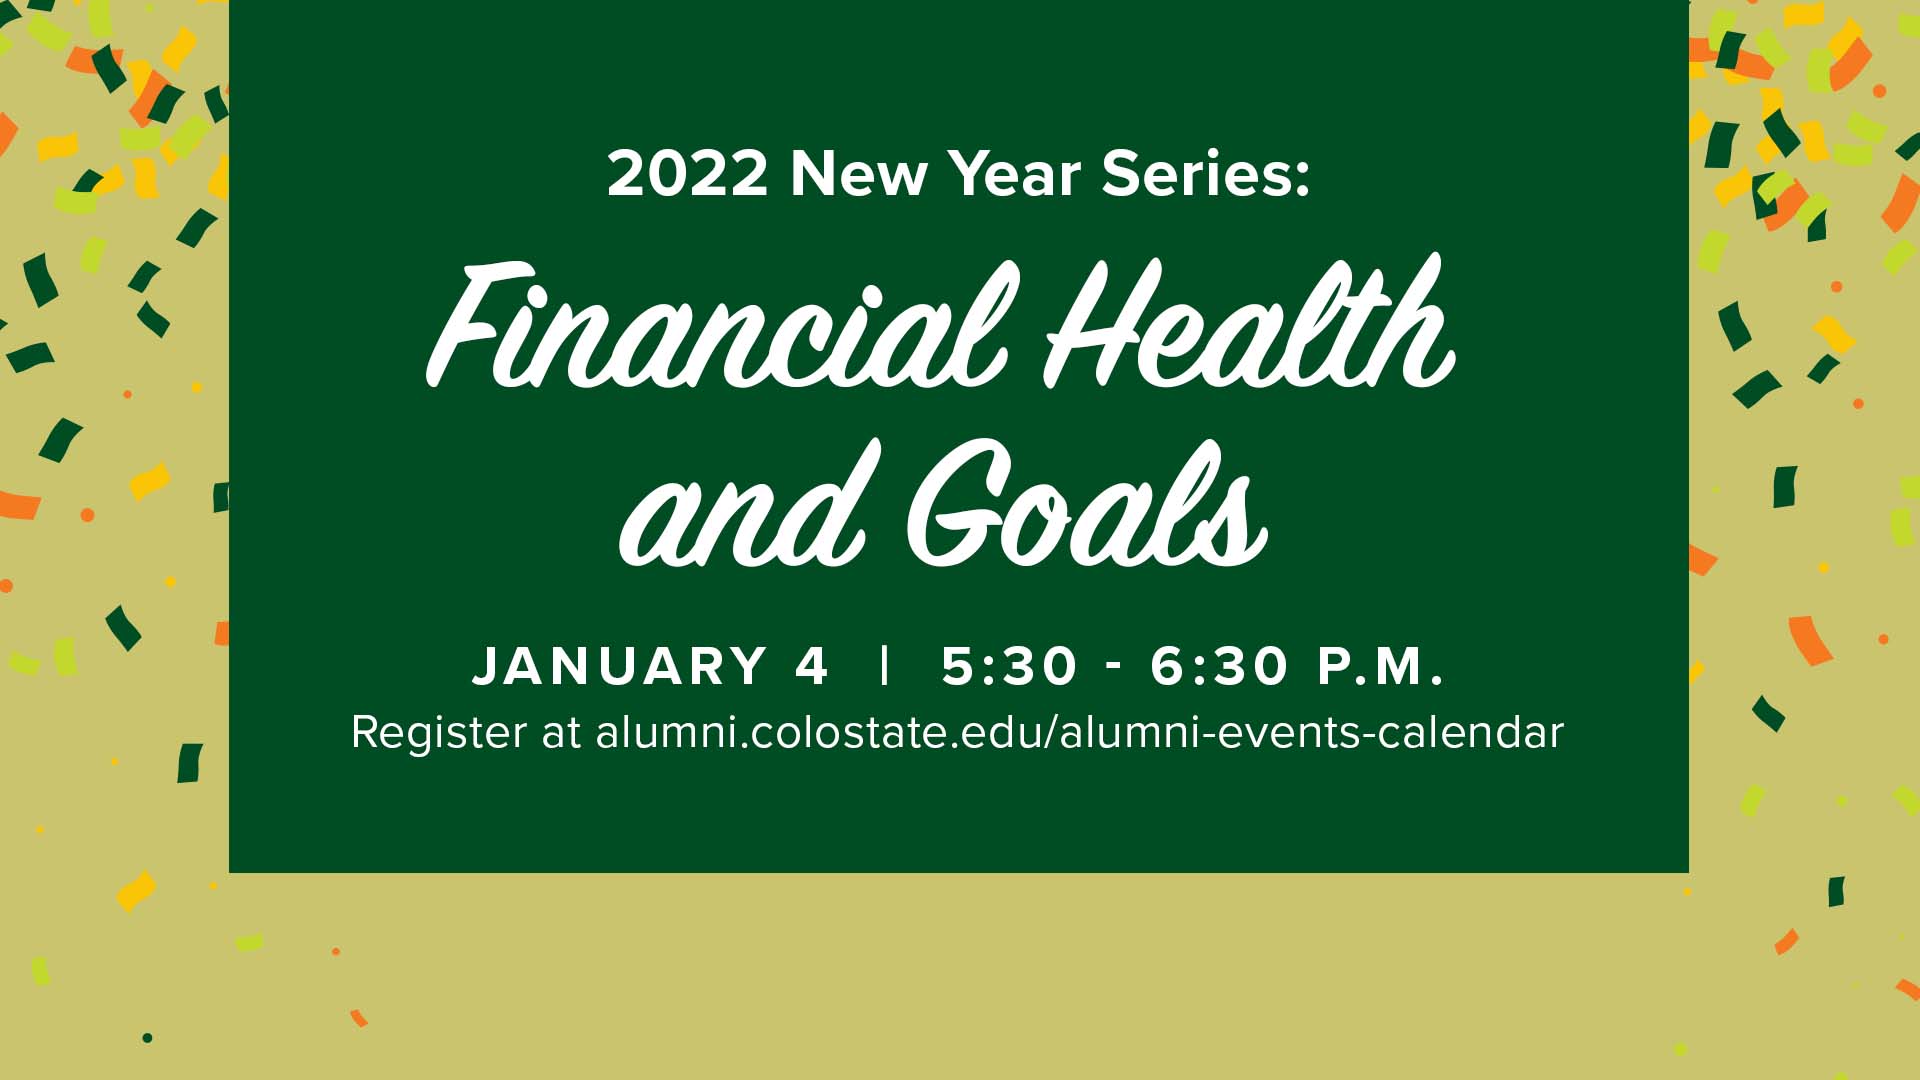 Image for New Year Series: Financial Health webinar